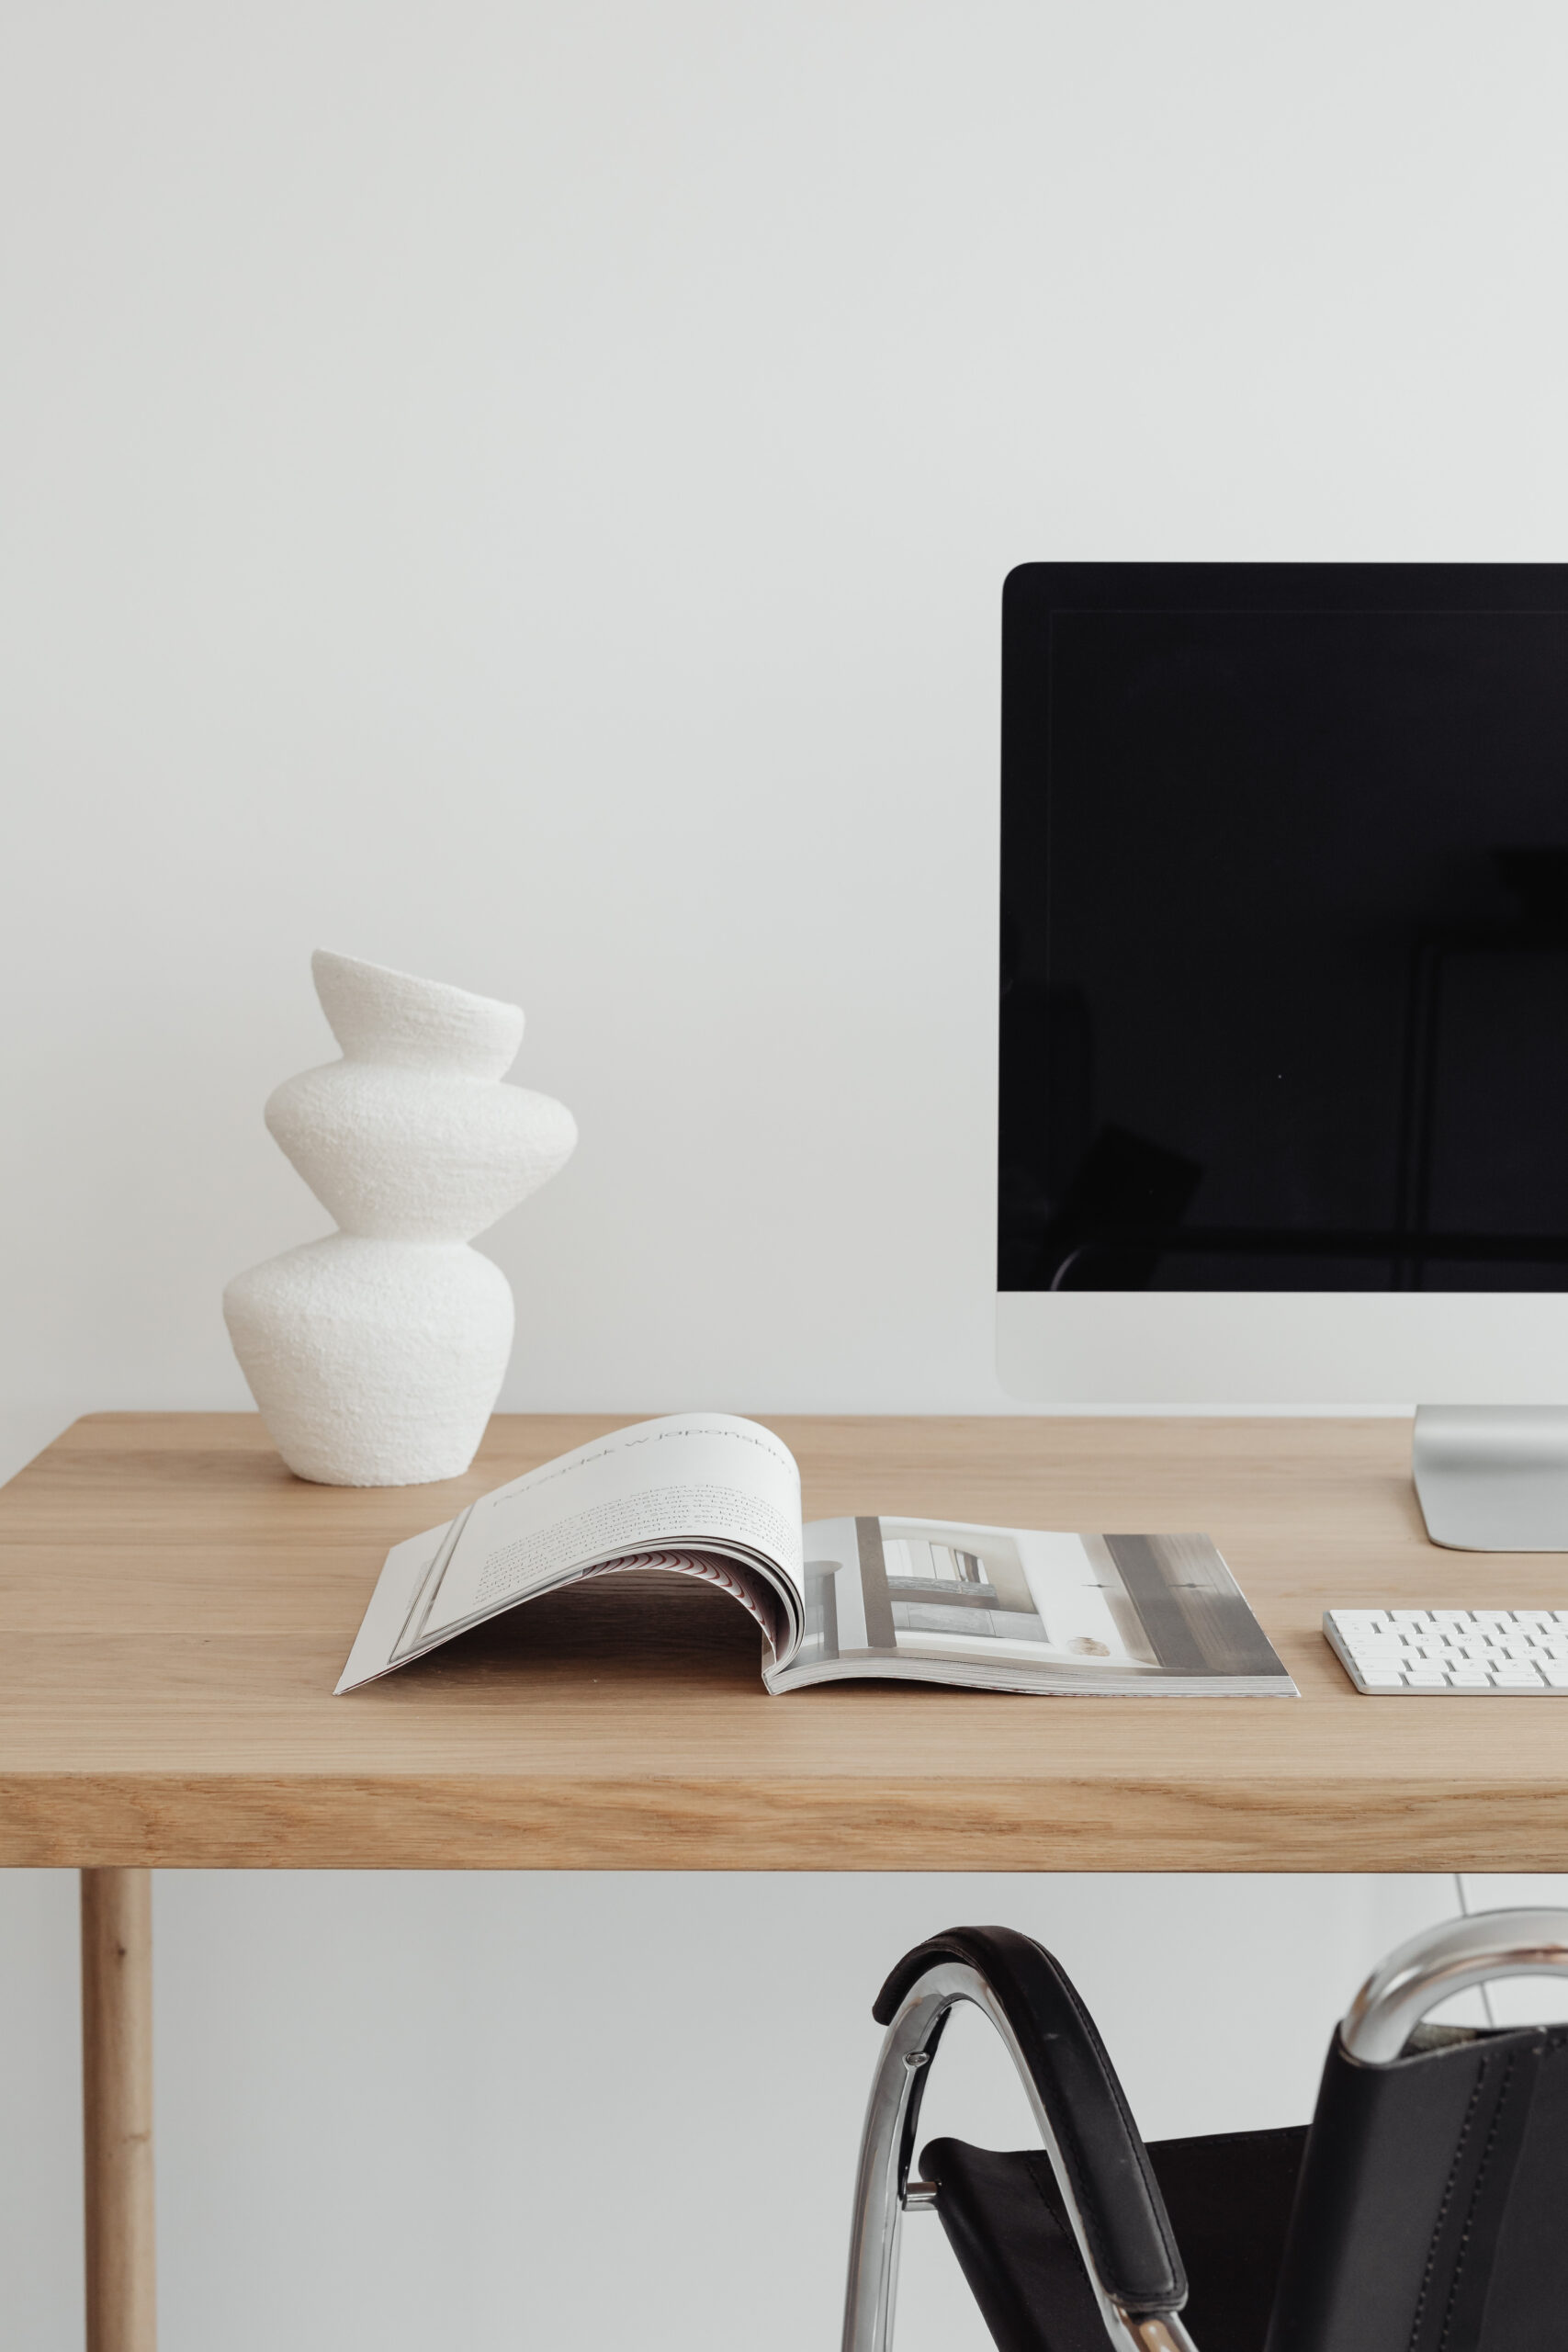 iMac and magazine on a wooden desk with an abstract white vase